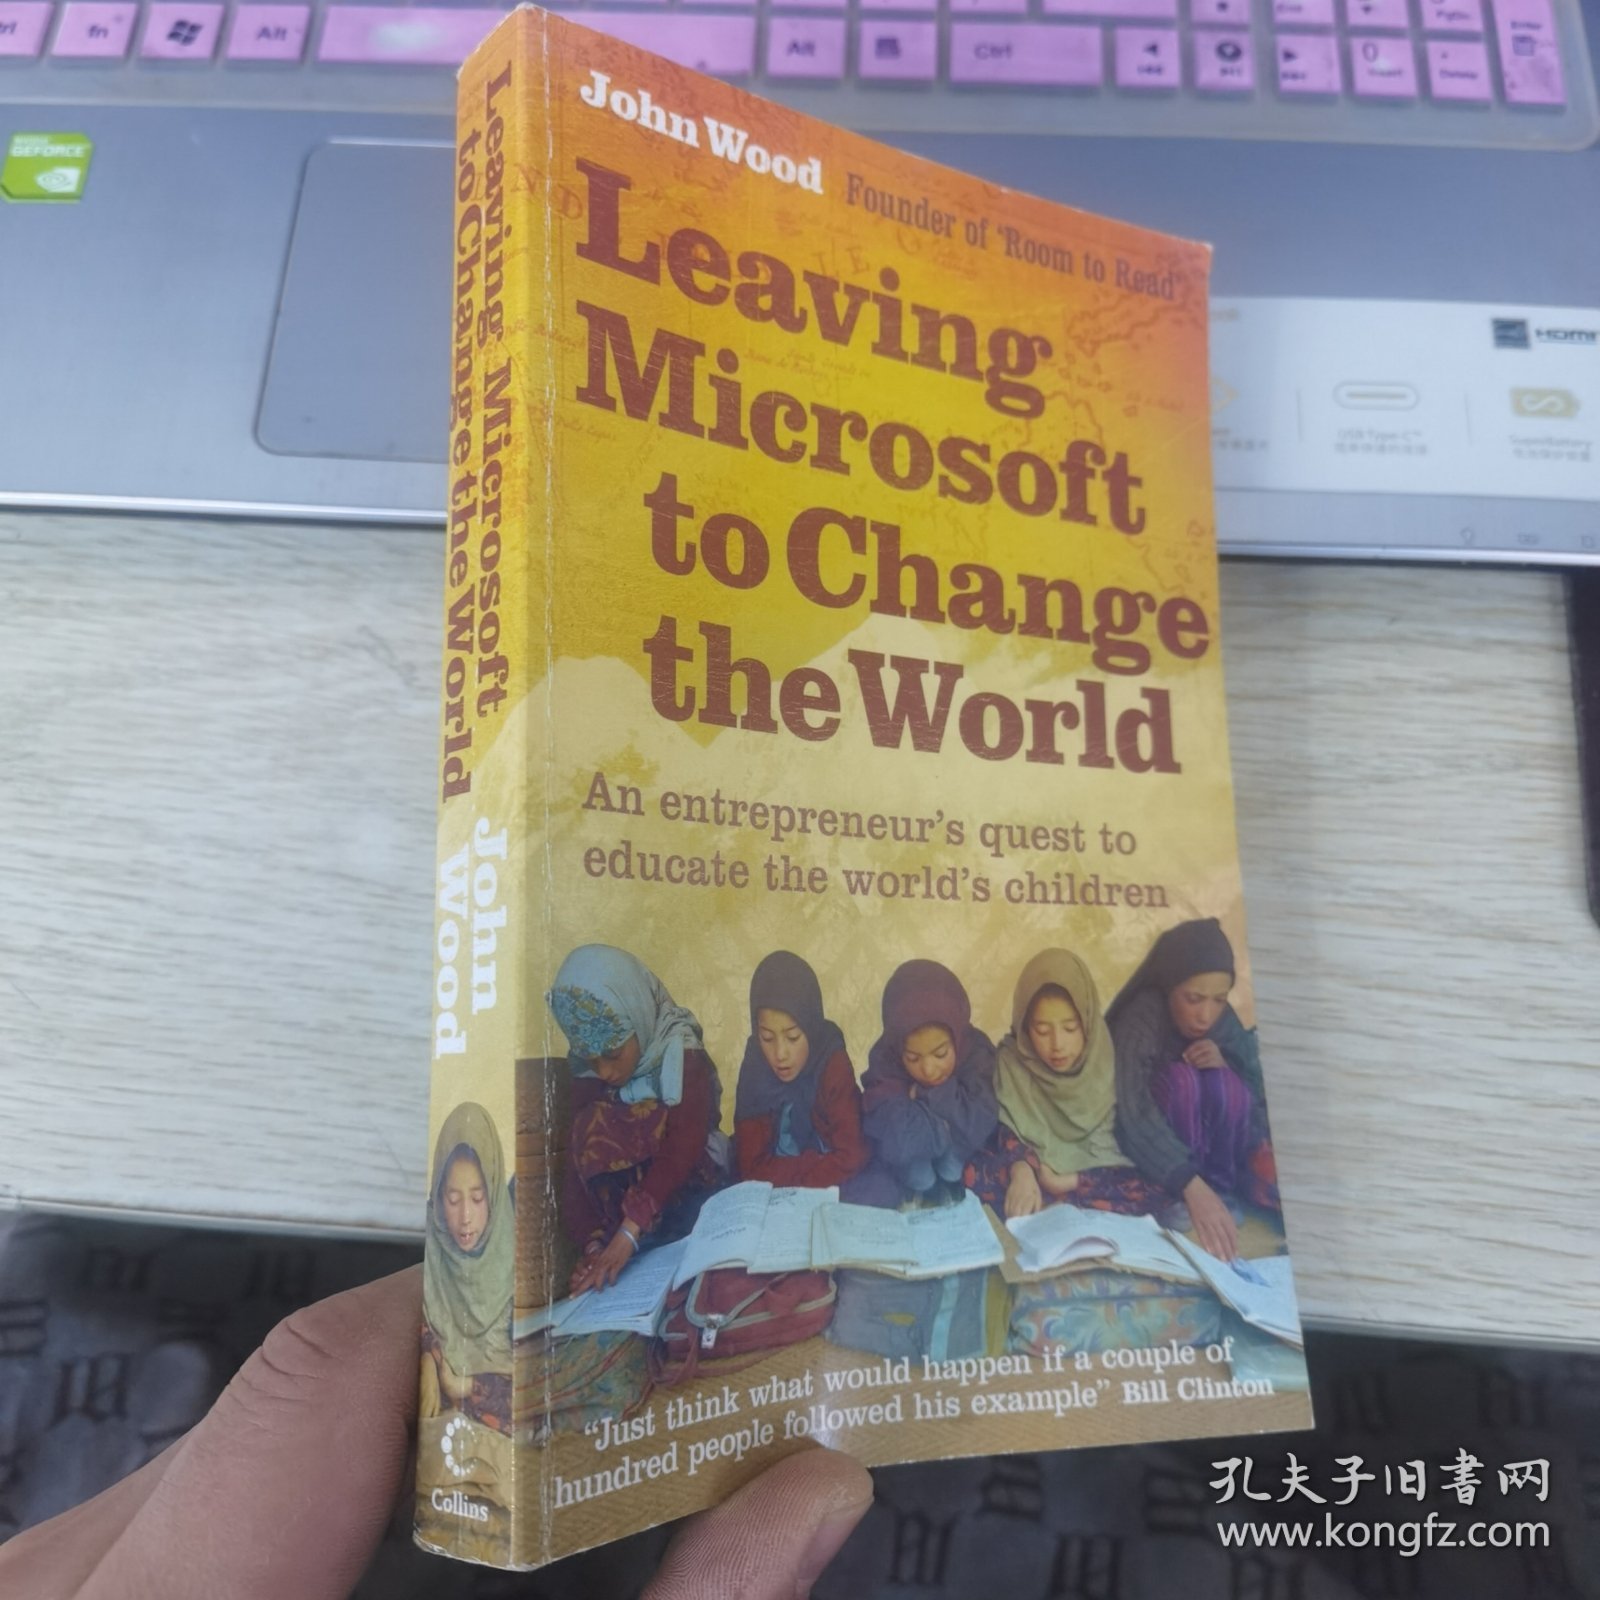 LEAVING MICROSOFT TO CHANGE THE WORLD:AN ENTREPRENEUR'S QUEST TO EDUCATE THE WORLD'S CHILDREN(英文原版32开平装)